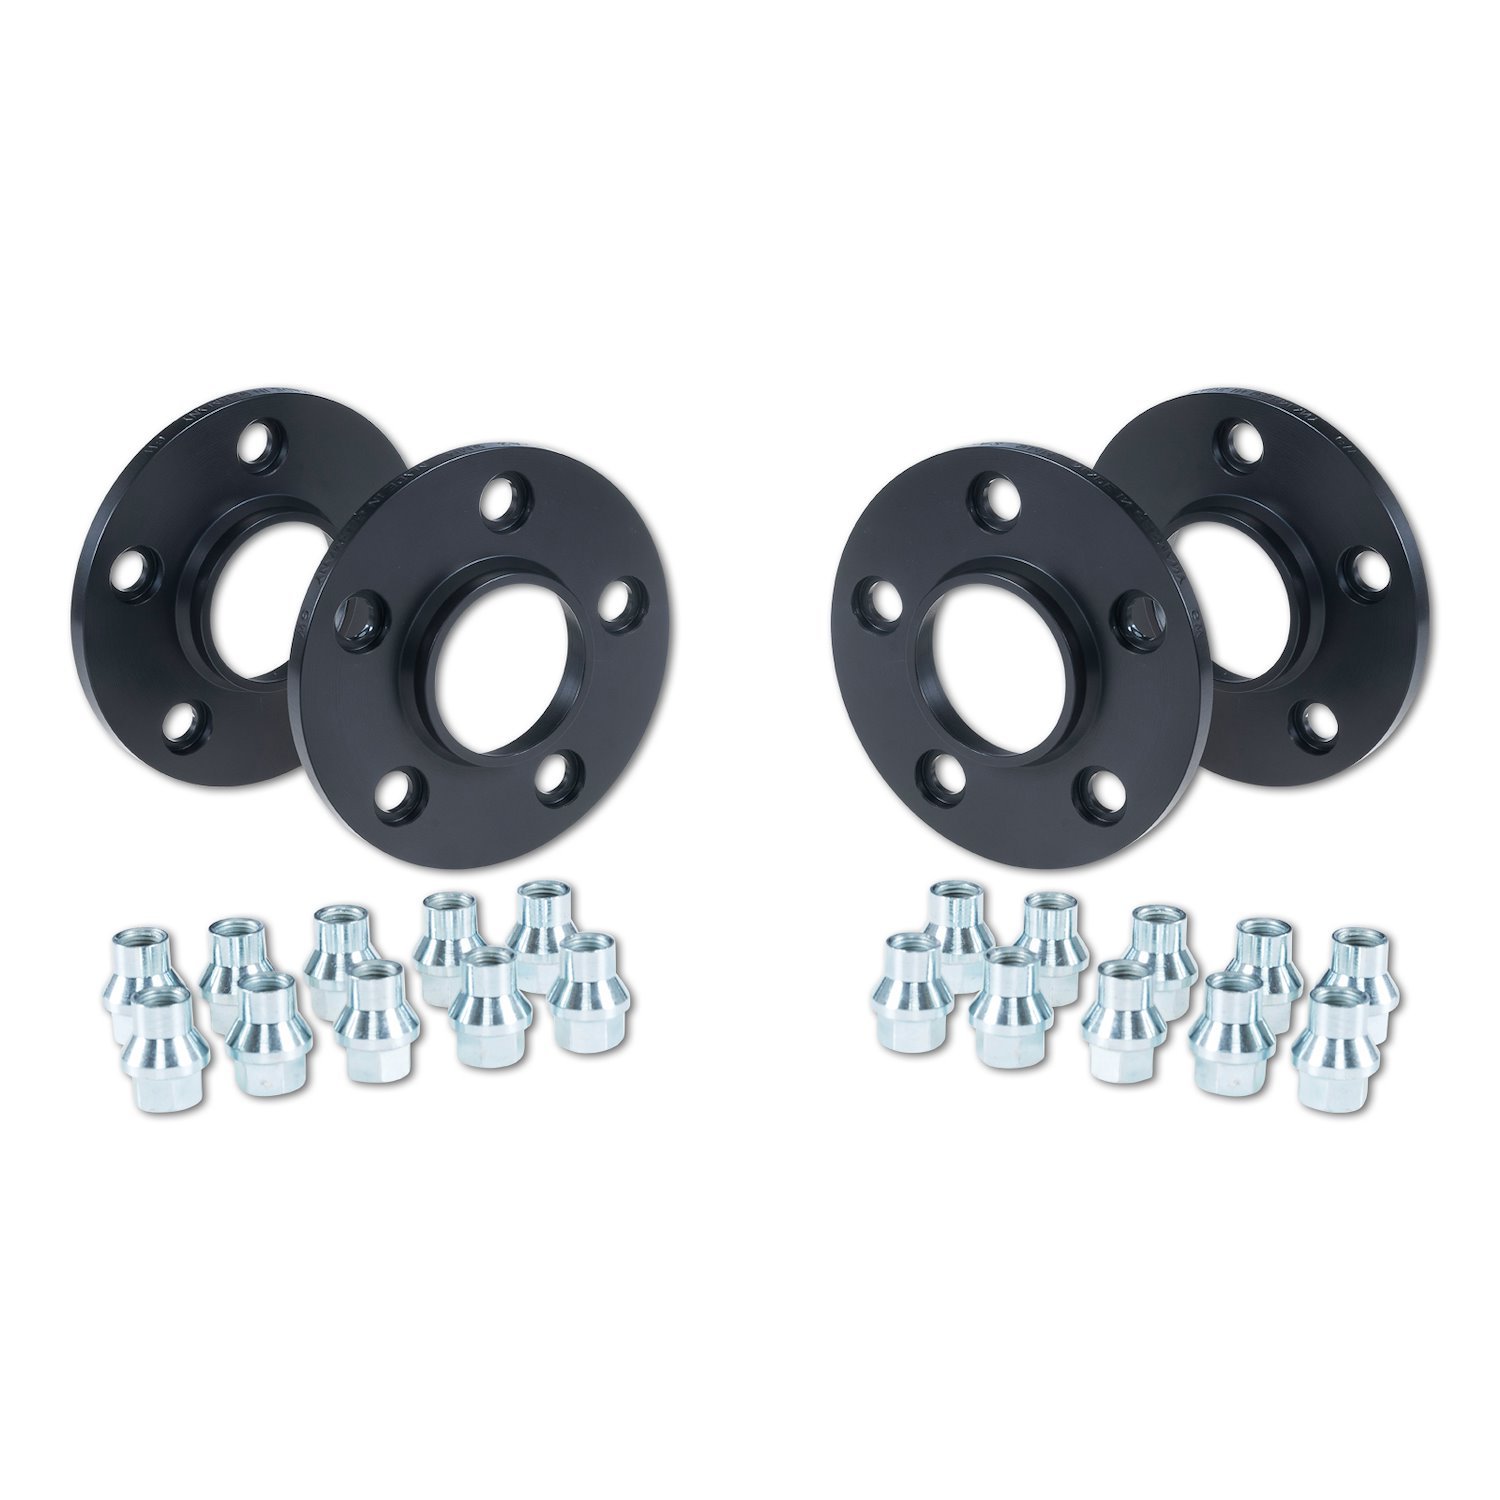 56012013 ST Easy Fit Wheel Spacer Kit for Ford Mustang (S550)